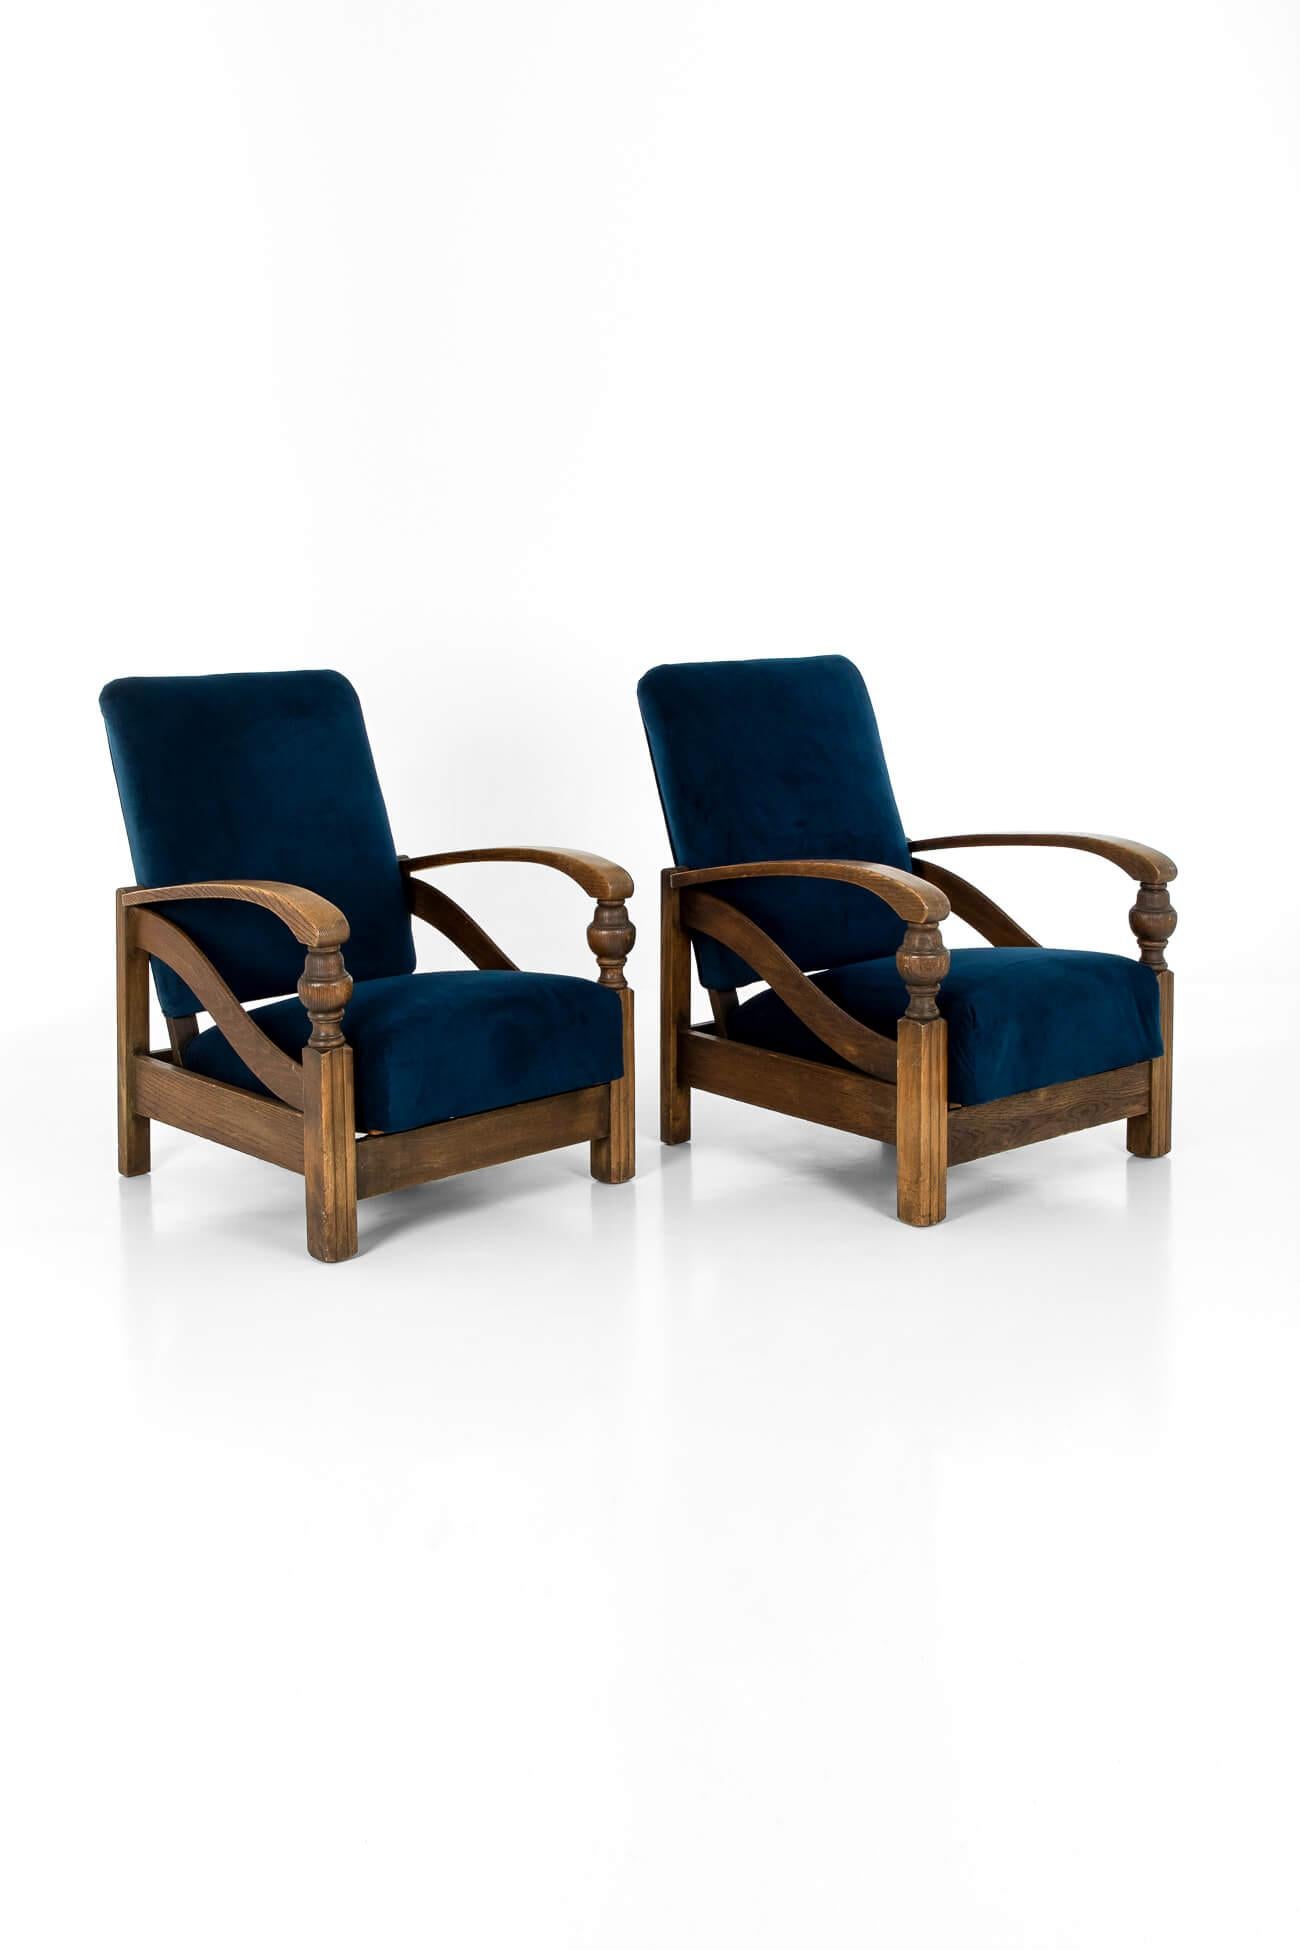 A fabulous pair of Art Deco recliner chairs in oak.

With high backs, sweeping curved arms, and baluster supports raised on turned legs.

Both seat bases feature new webbing and the seat cushions have been reupholstered in an attractive heavy dark